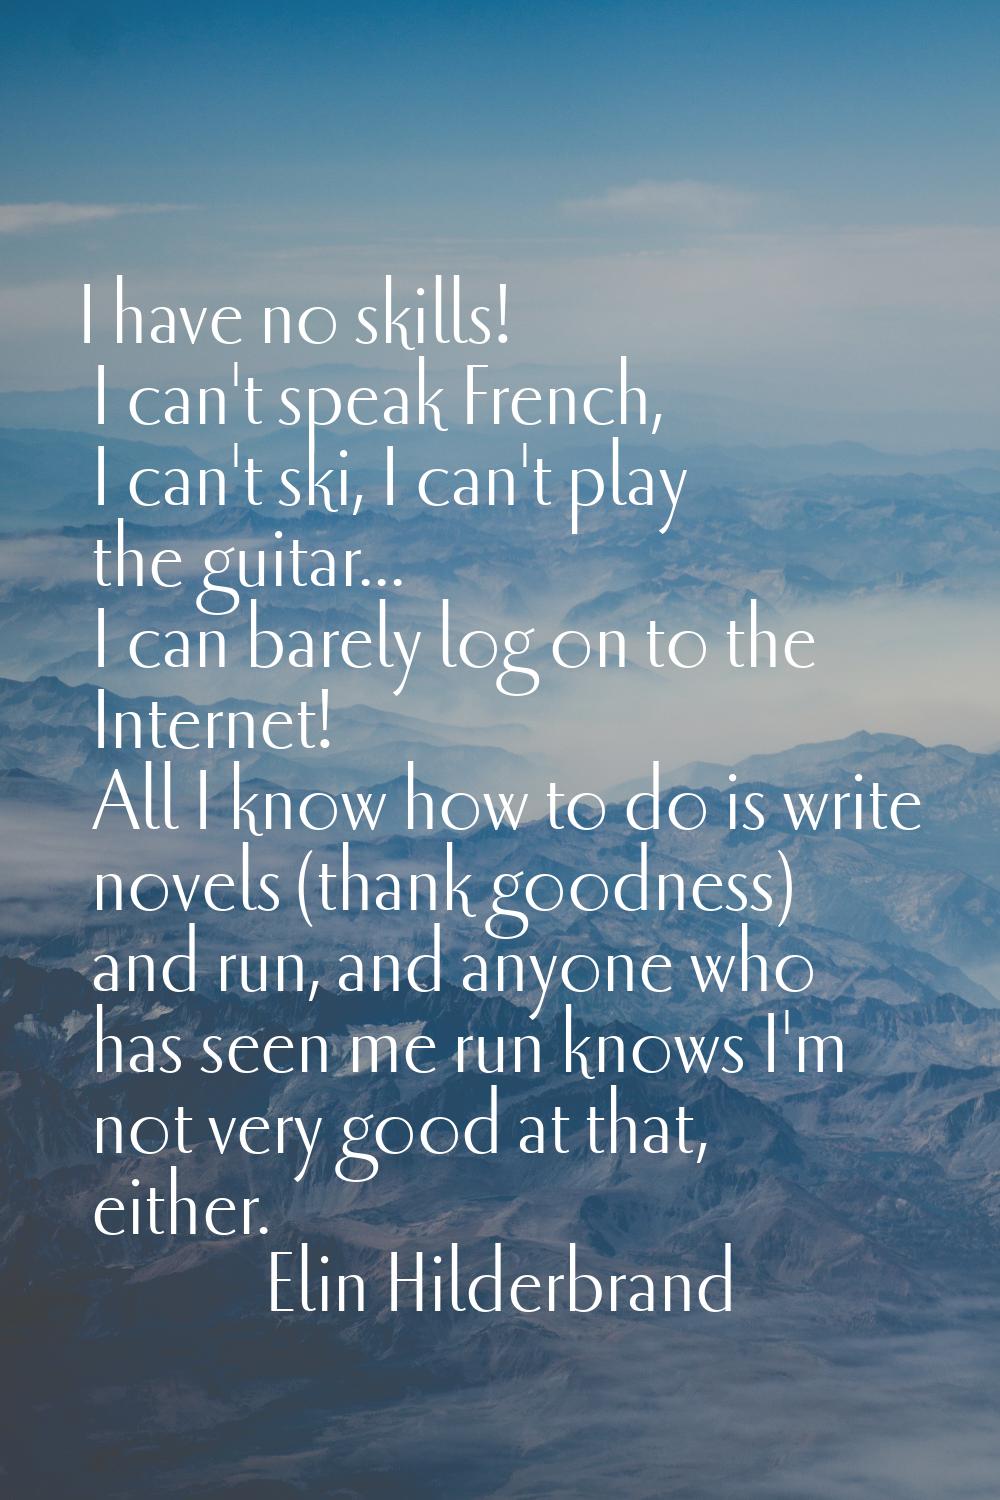 I have no skills! I can't speak French, I can't ski, I can't play the guitar... I can barely log on